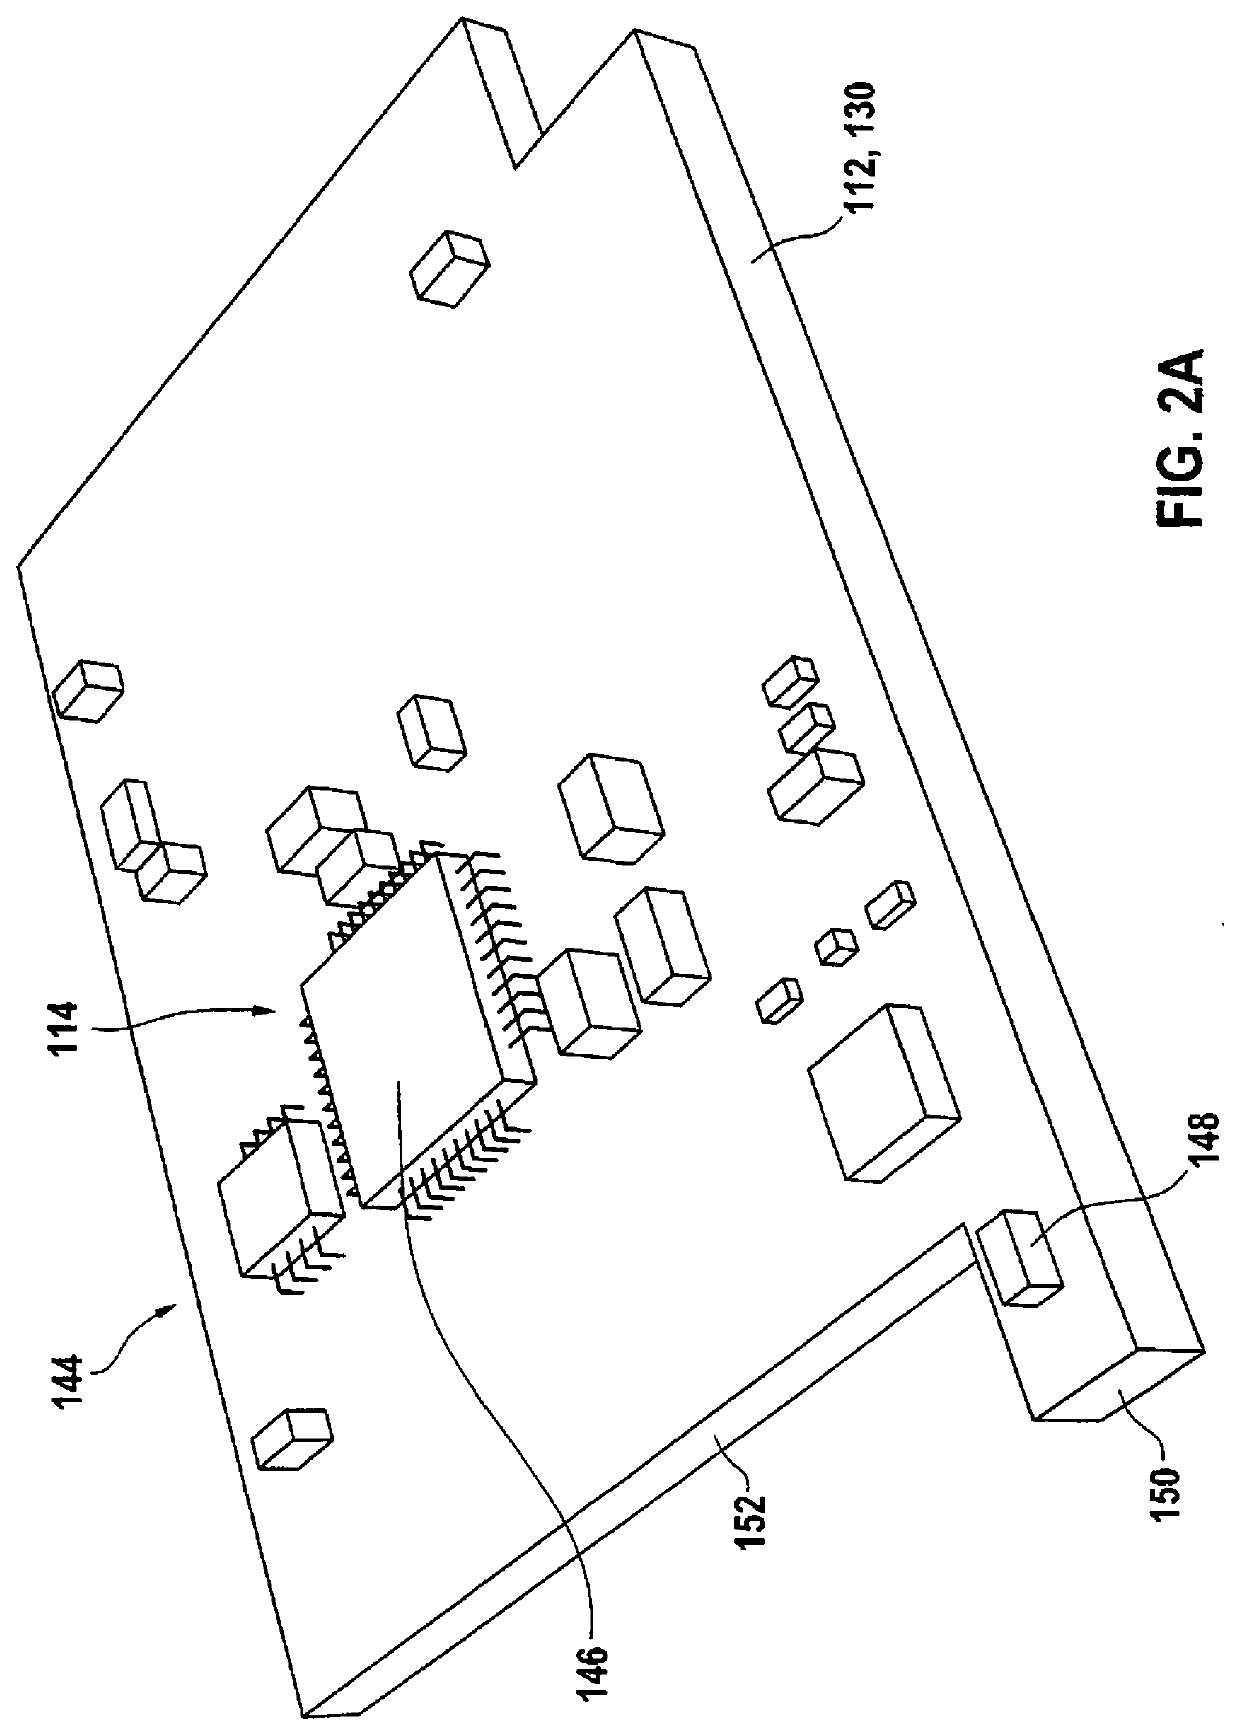 Sensor for detecting at least one property of a fluid medium